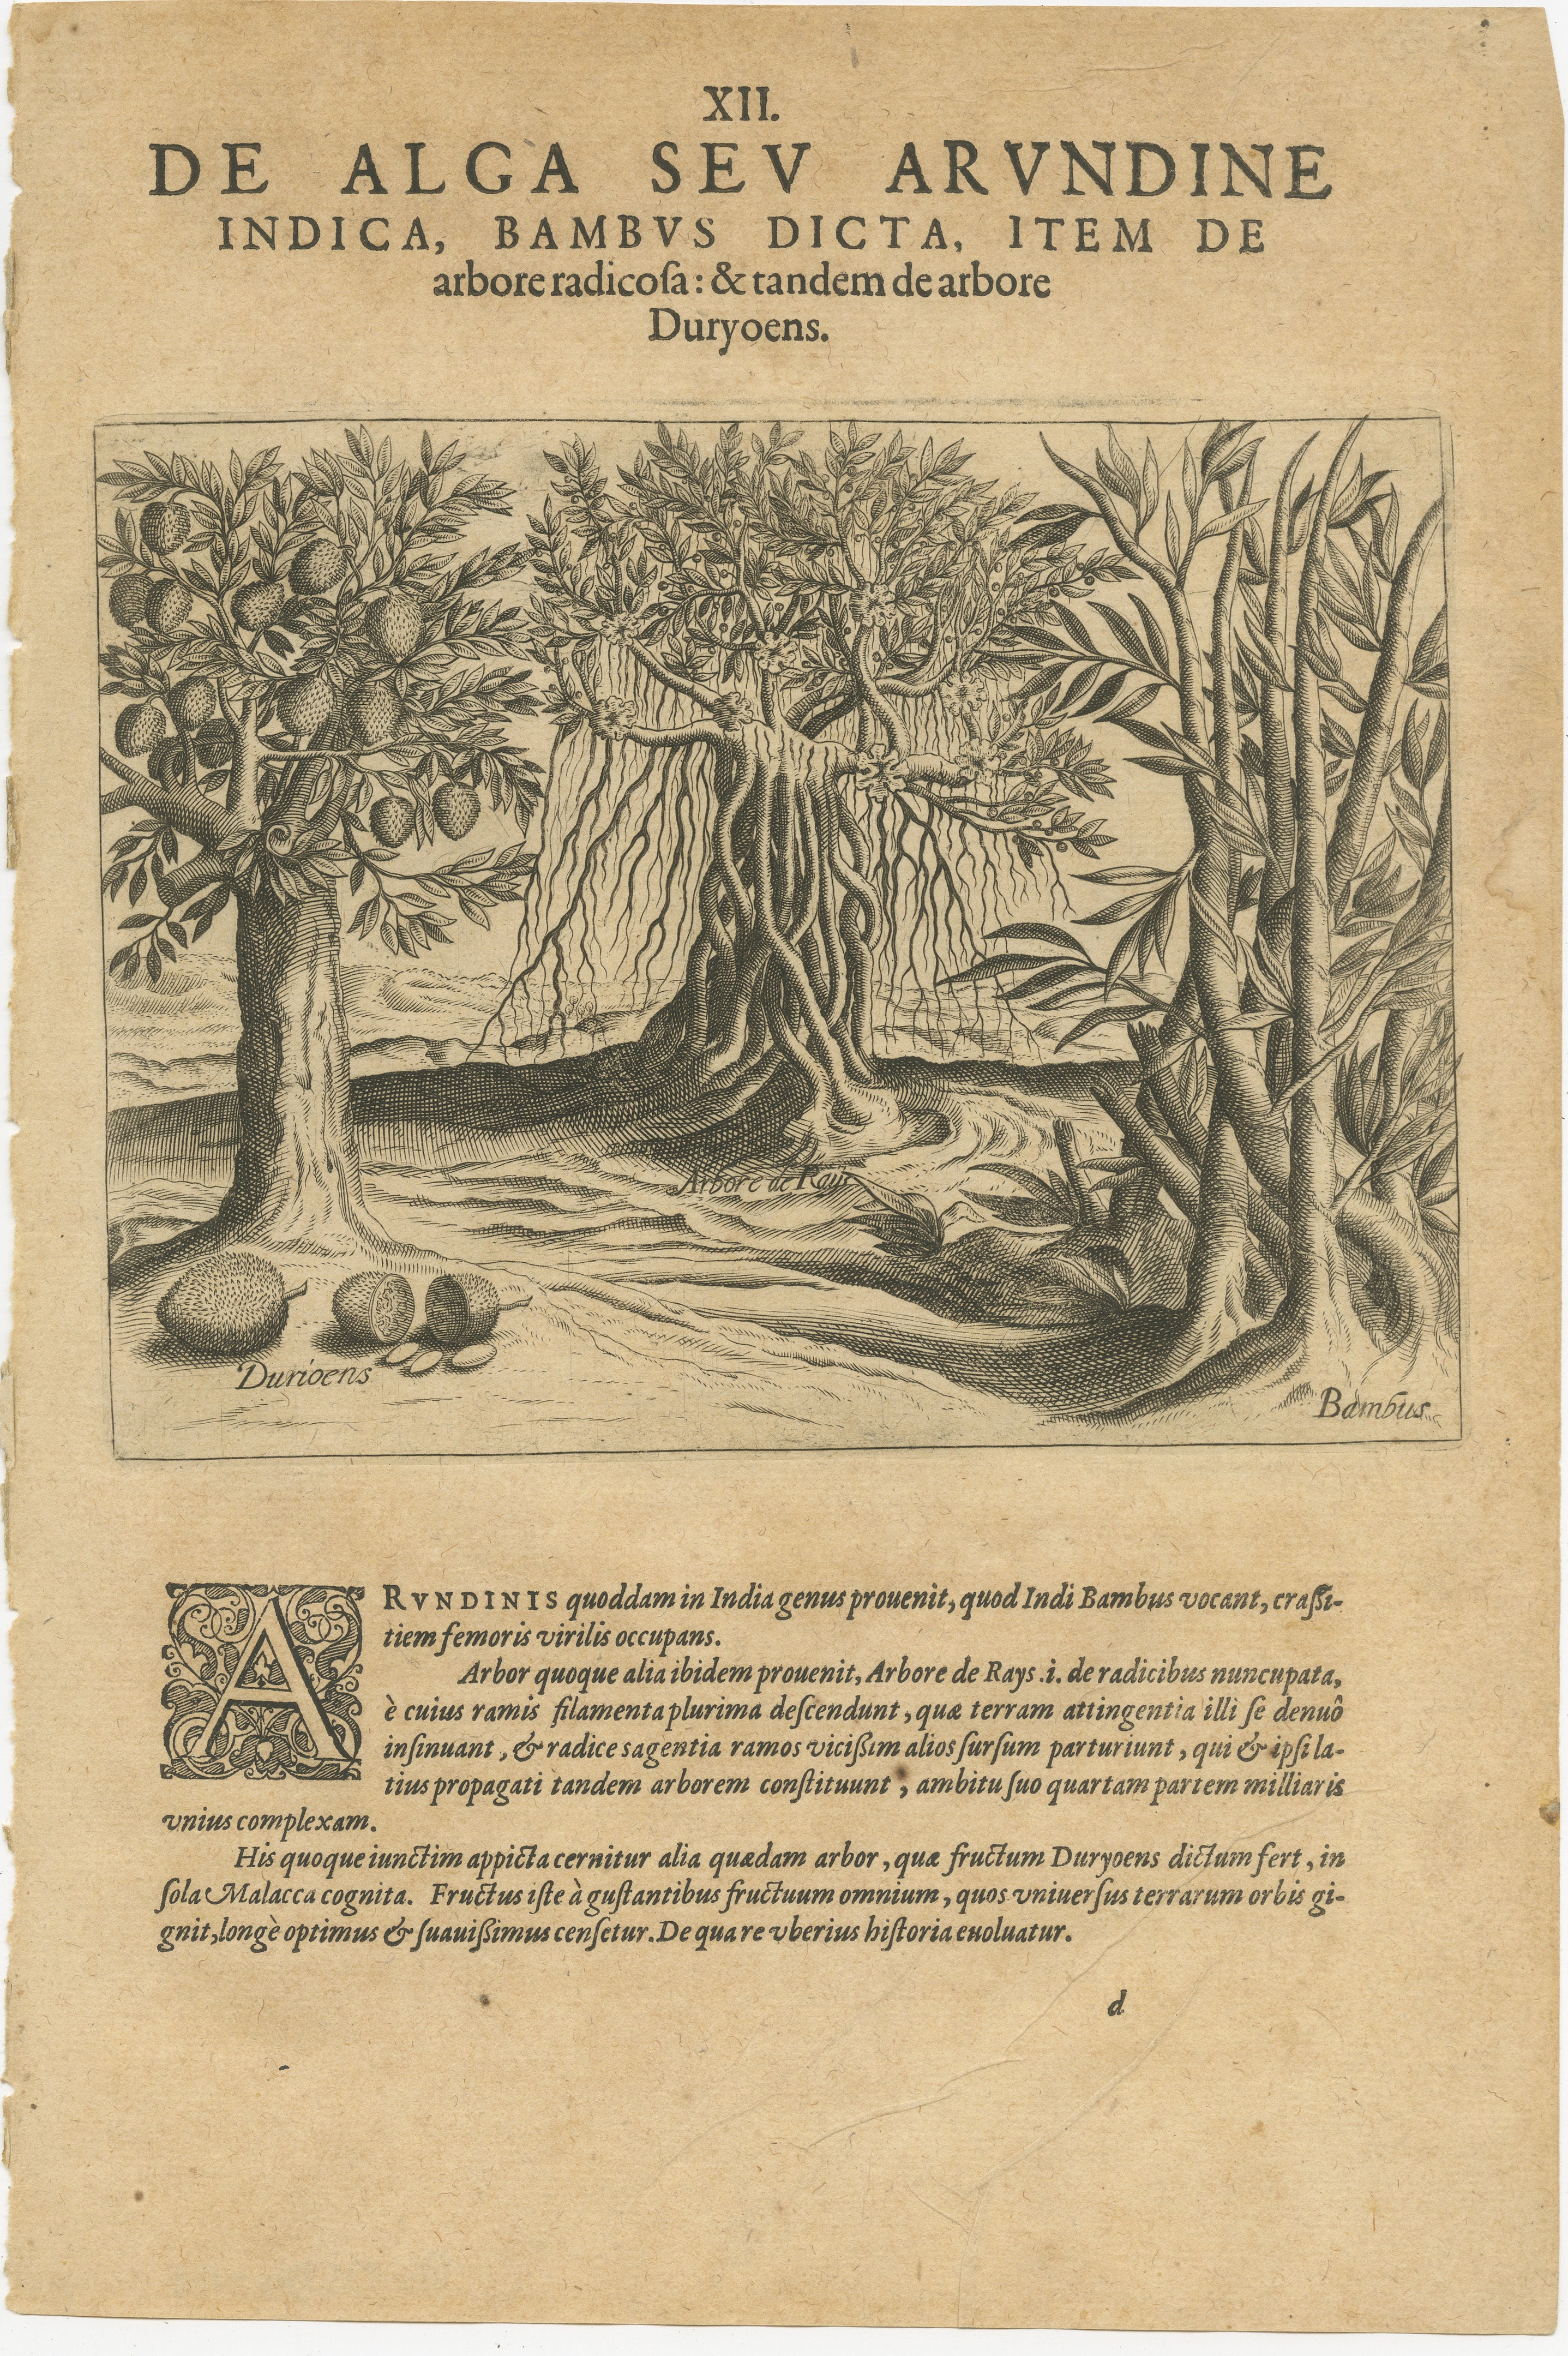 This 1601 engraving by Theodore de Bry, a master engraver and publisher of the late Renaissance period, depicts the flora of India with a remarkable degree of detail and artistry. The print is titled 